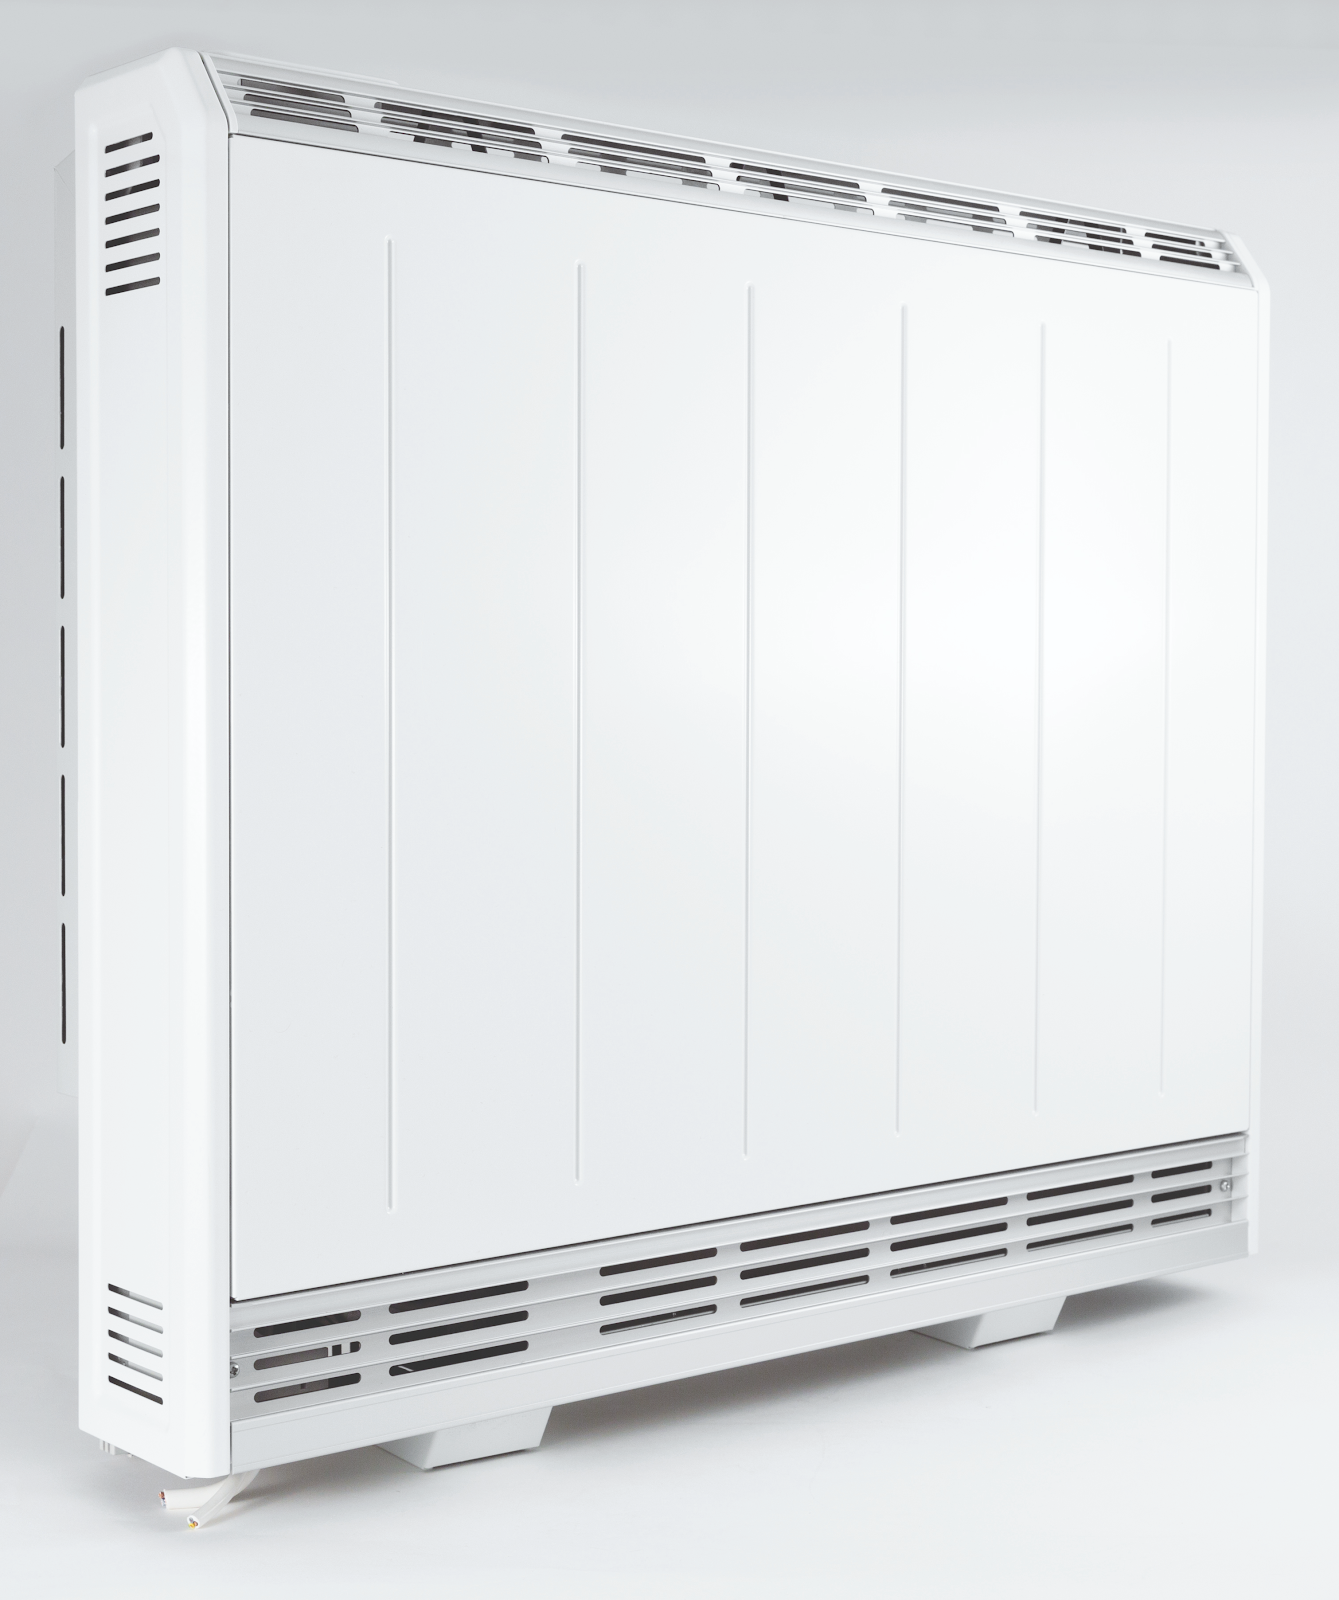 Storage Heaters: Differences between older and newer models - 21st Century  Heating